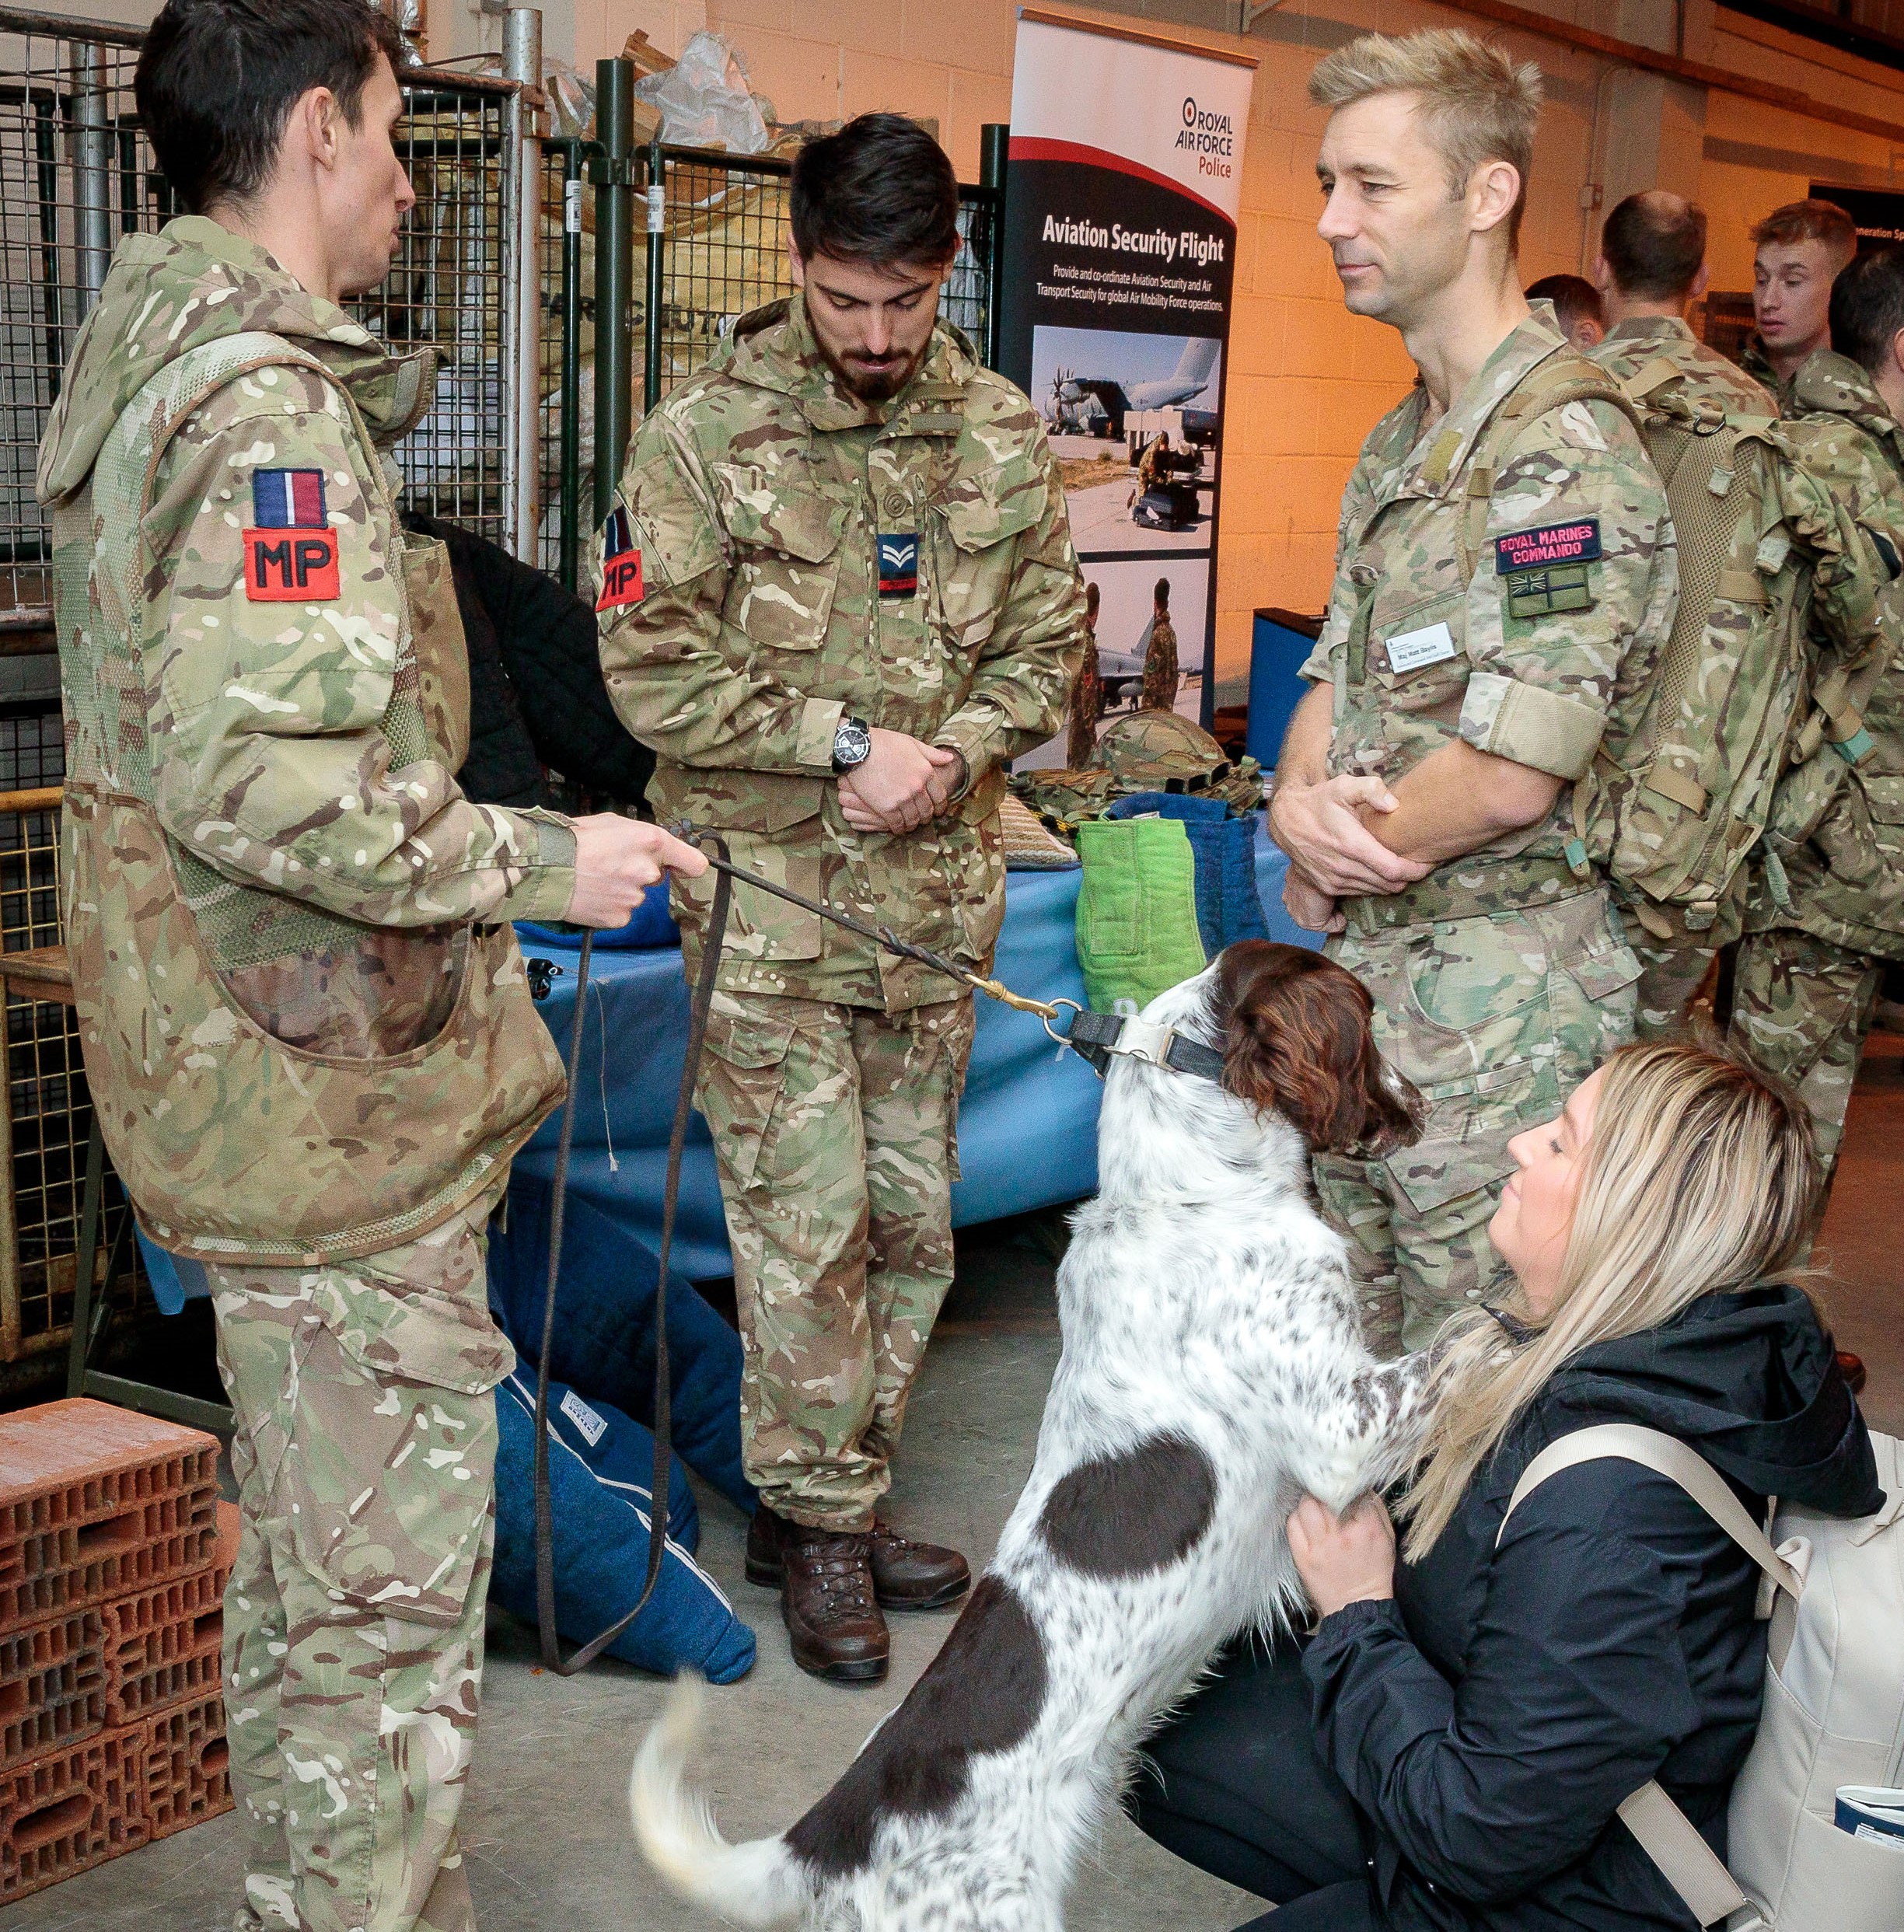 Image shows RAF Police with military working dog greeting civilian.